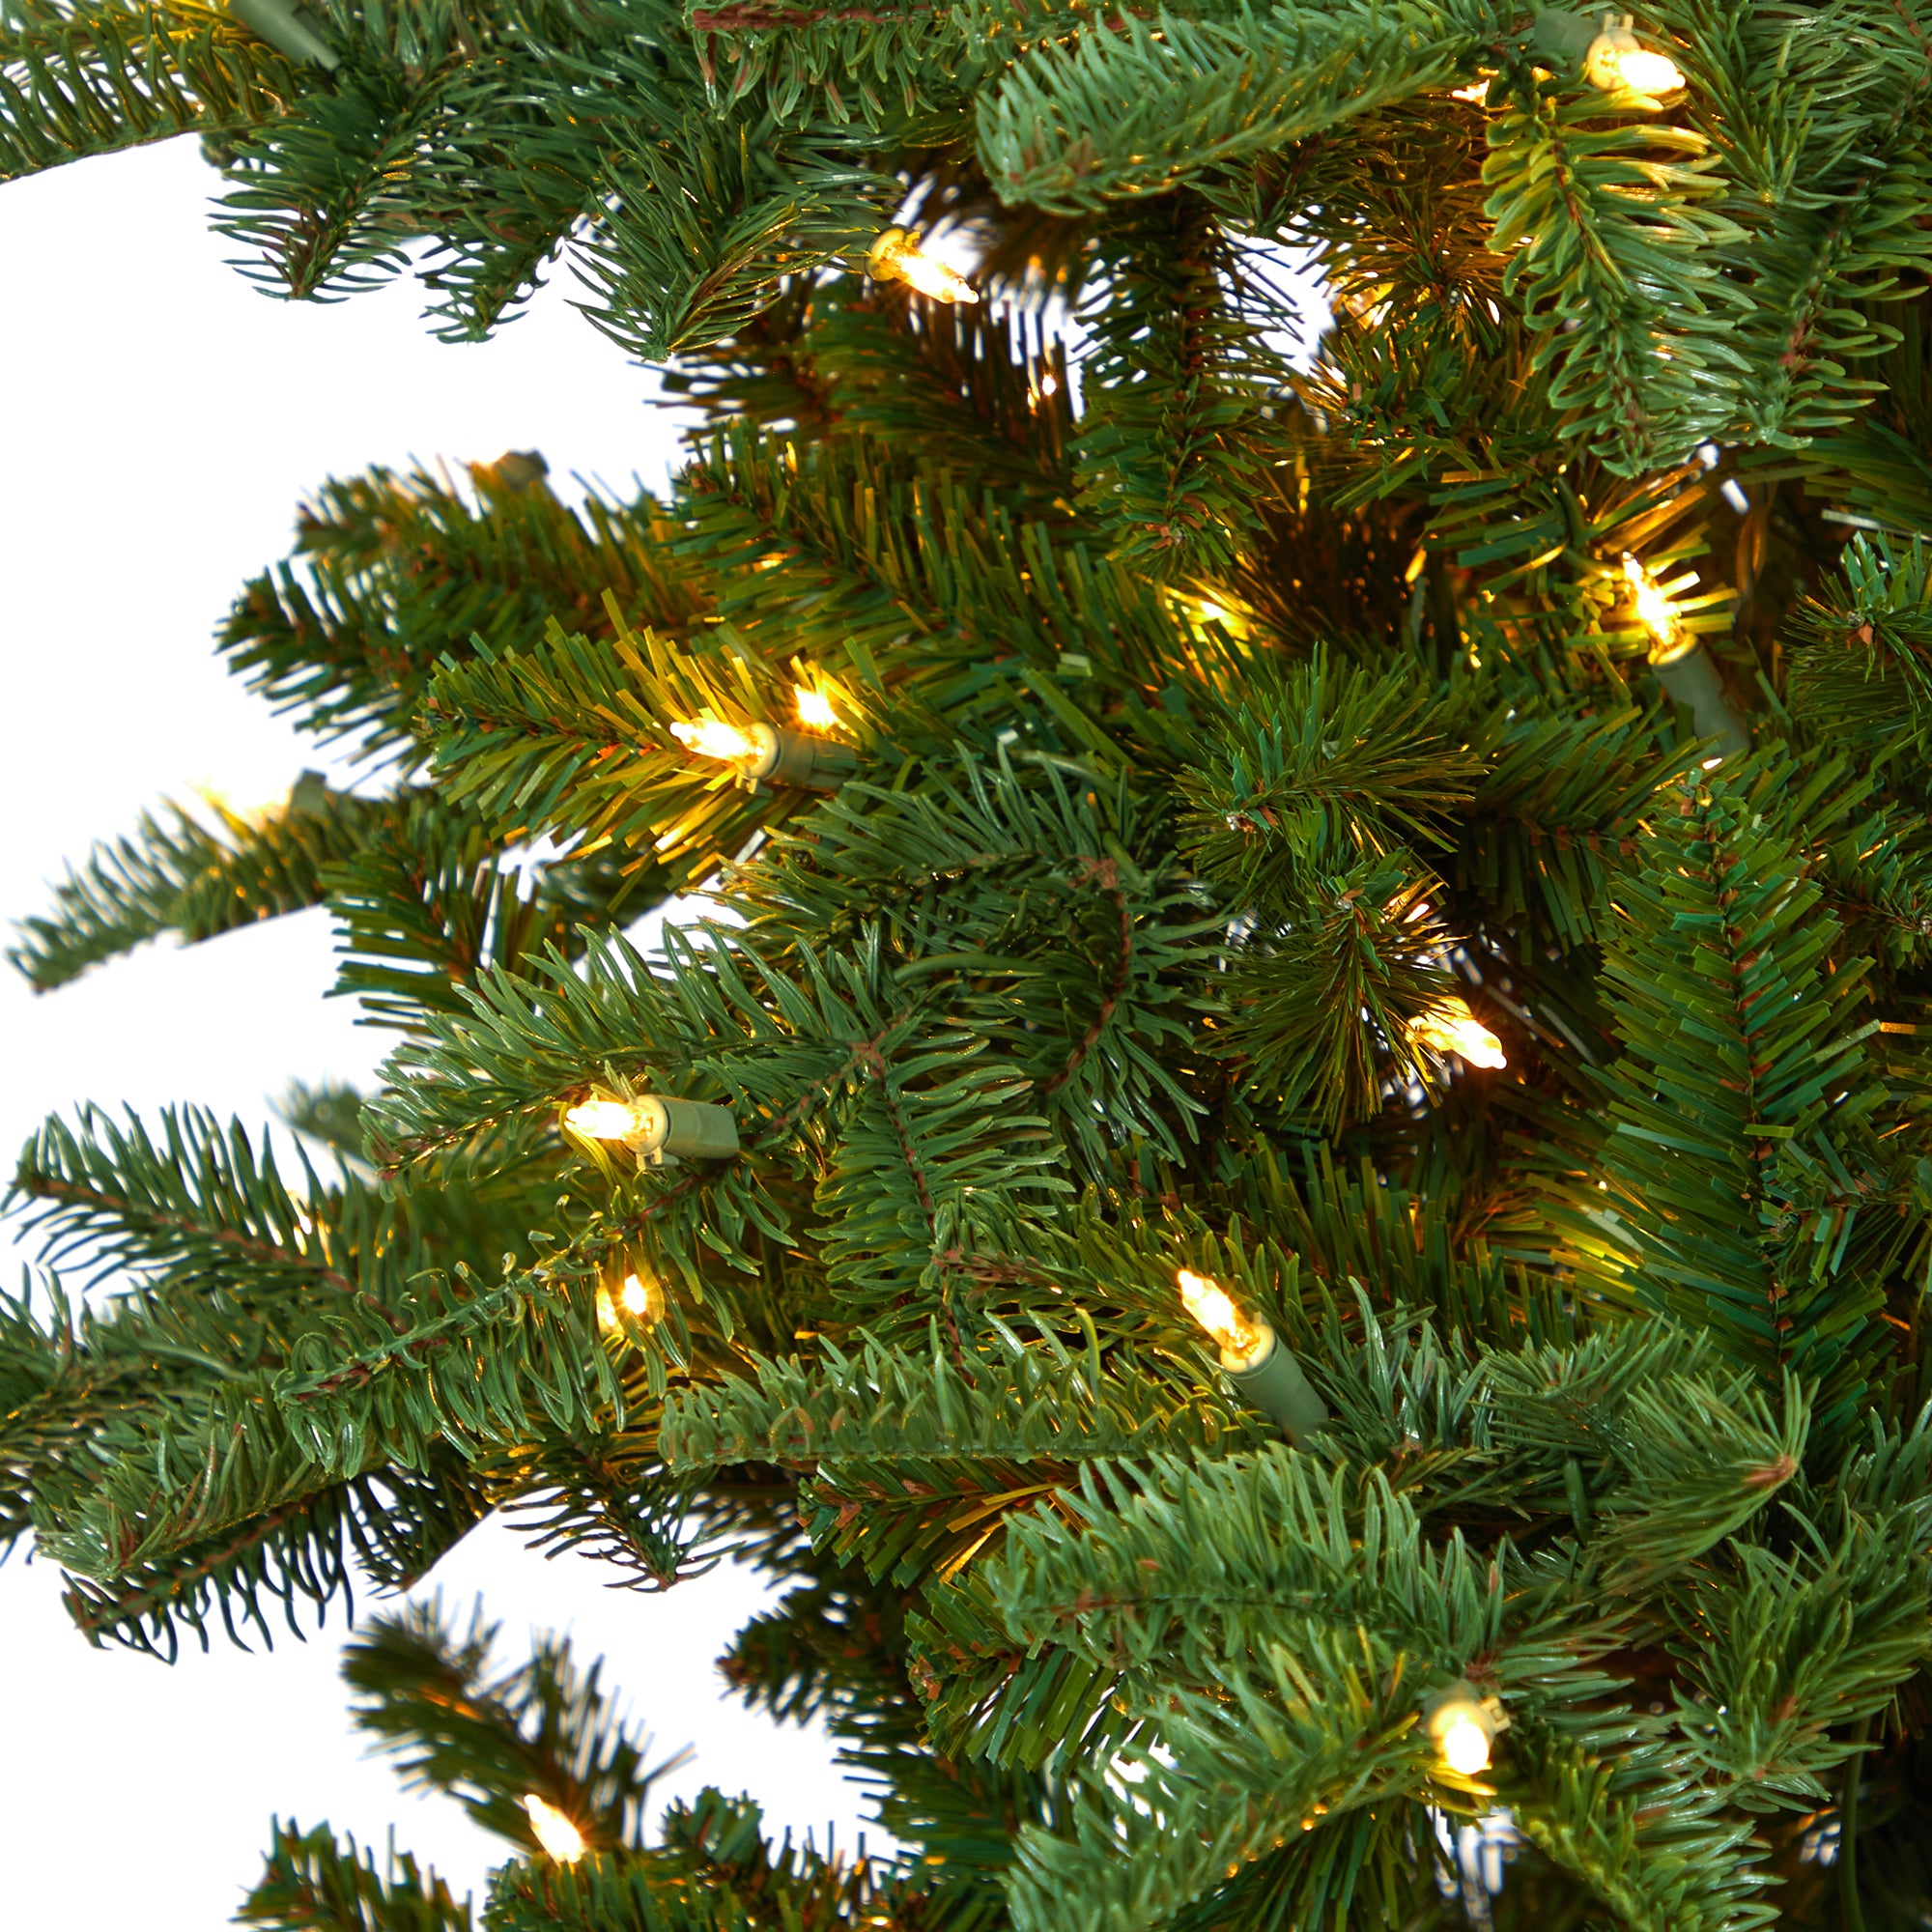 8' South Carolina Fir Artificial Christmas Tree with 650 Clear Lights and 2598 Bendable Branches